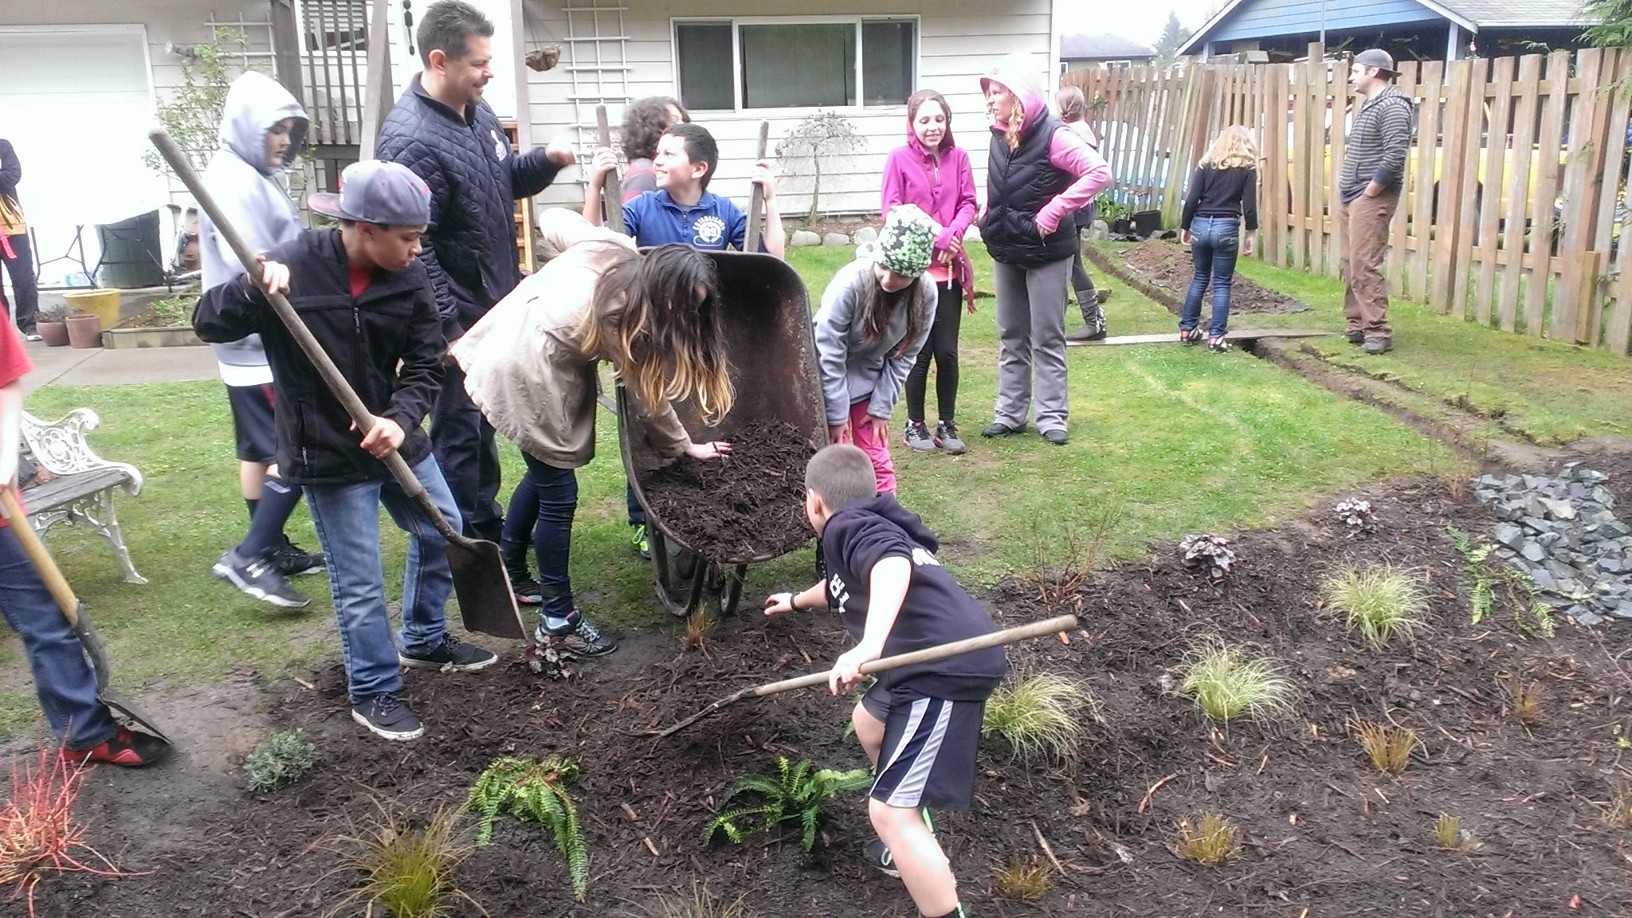 Marshall Elementary students were invited to come help plant in the new rain garden. Photo by Valerie Streeter